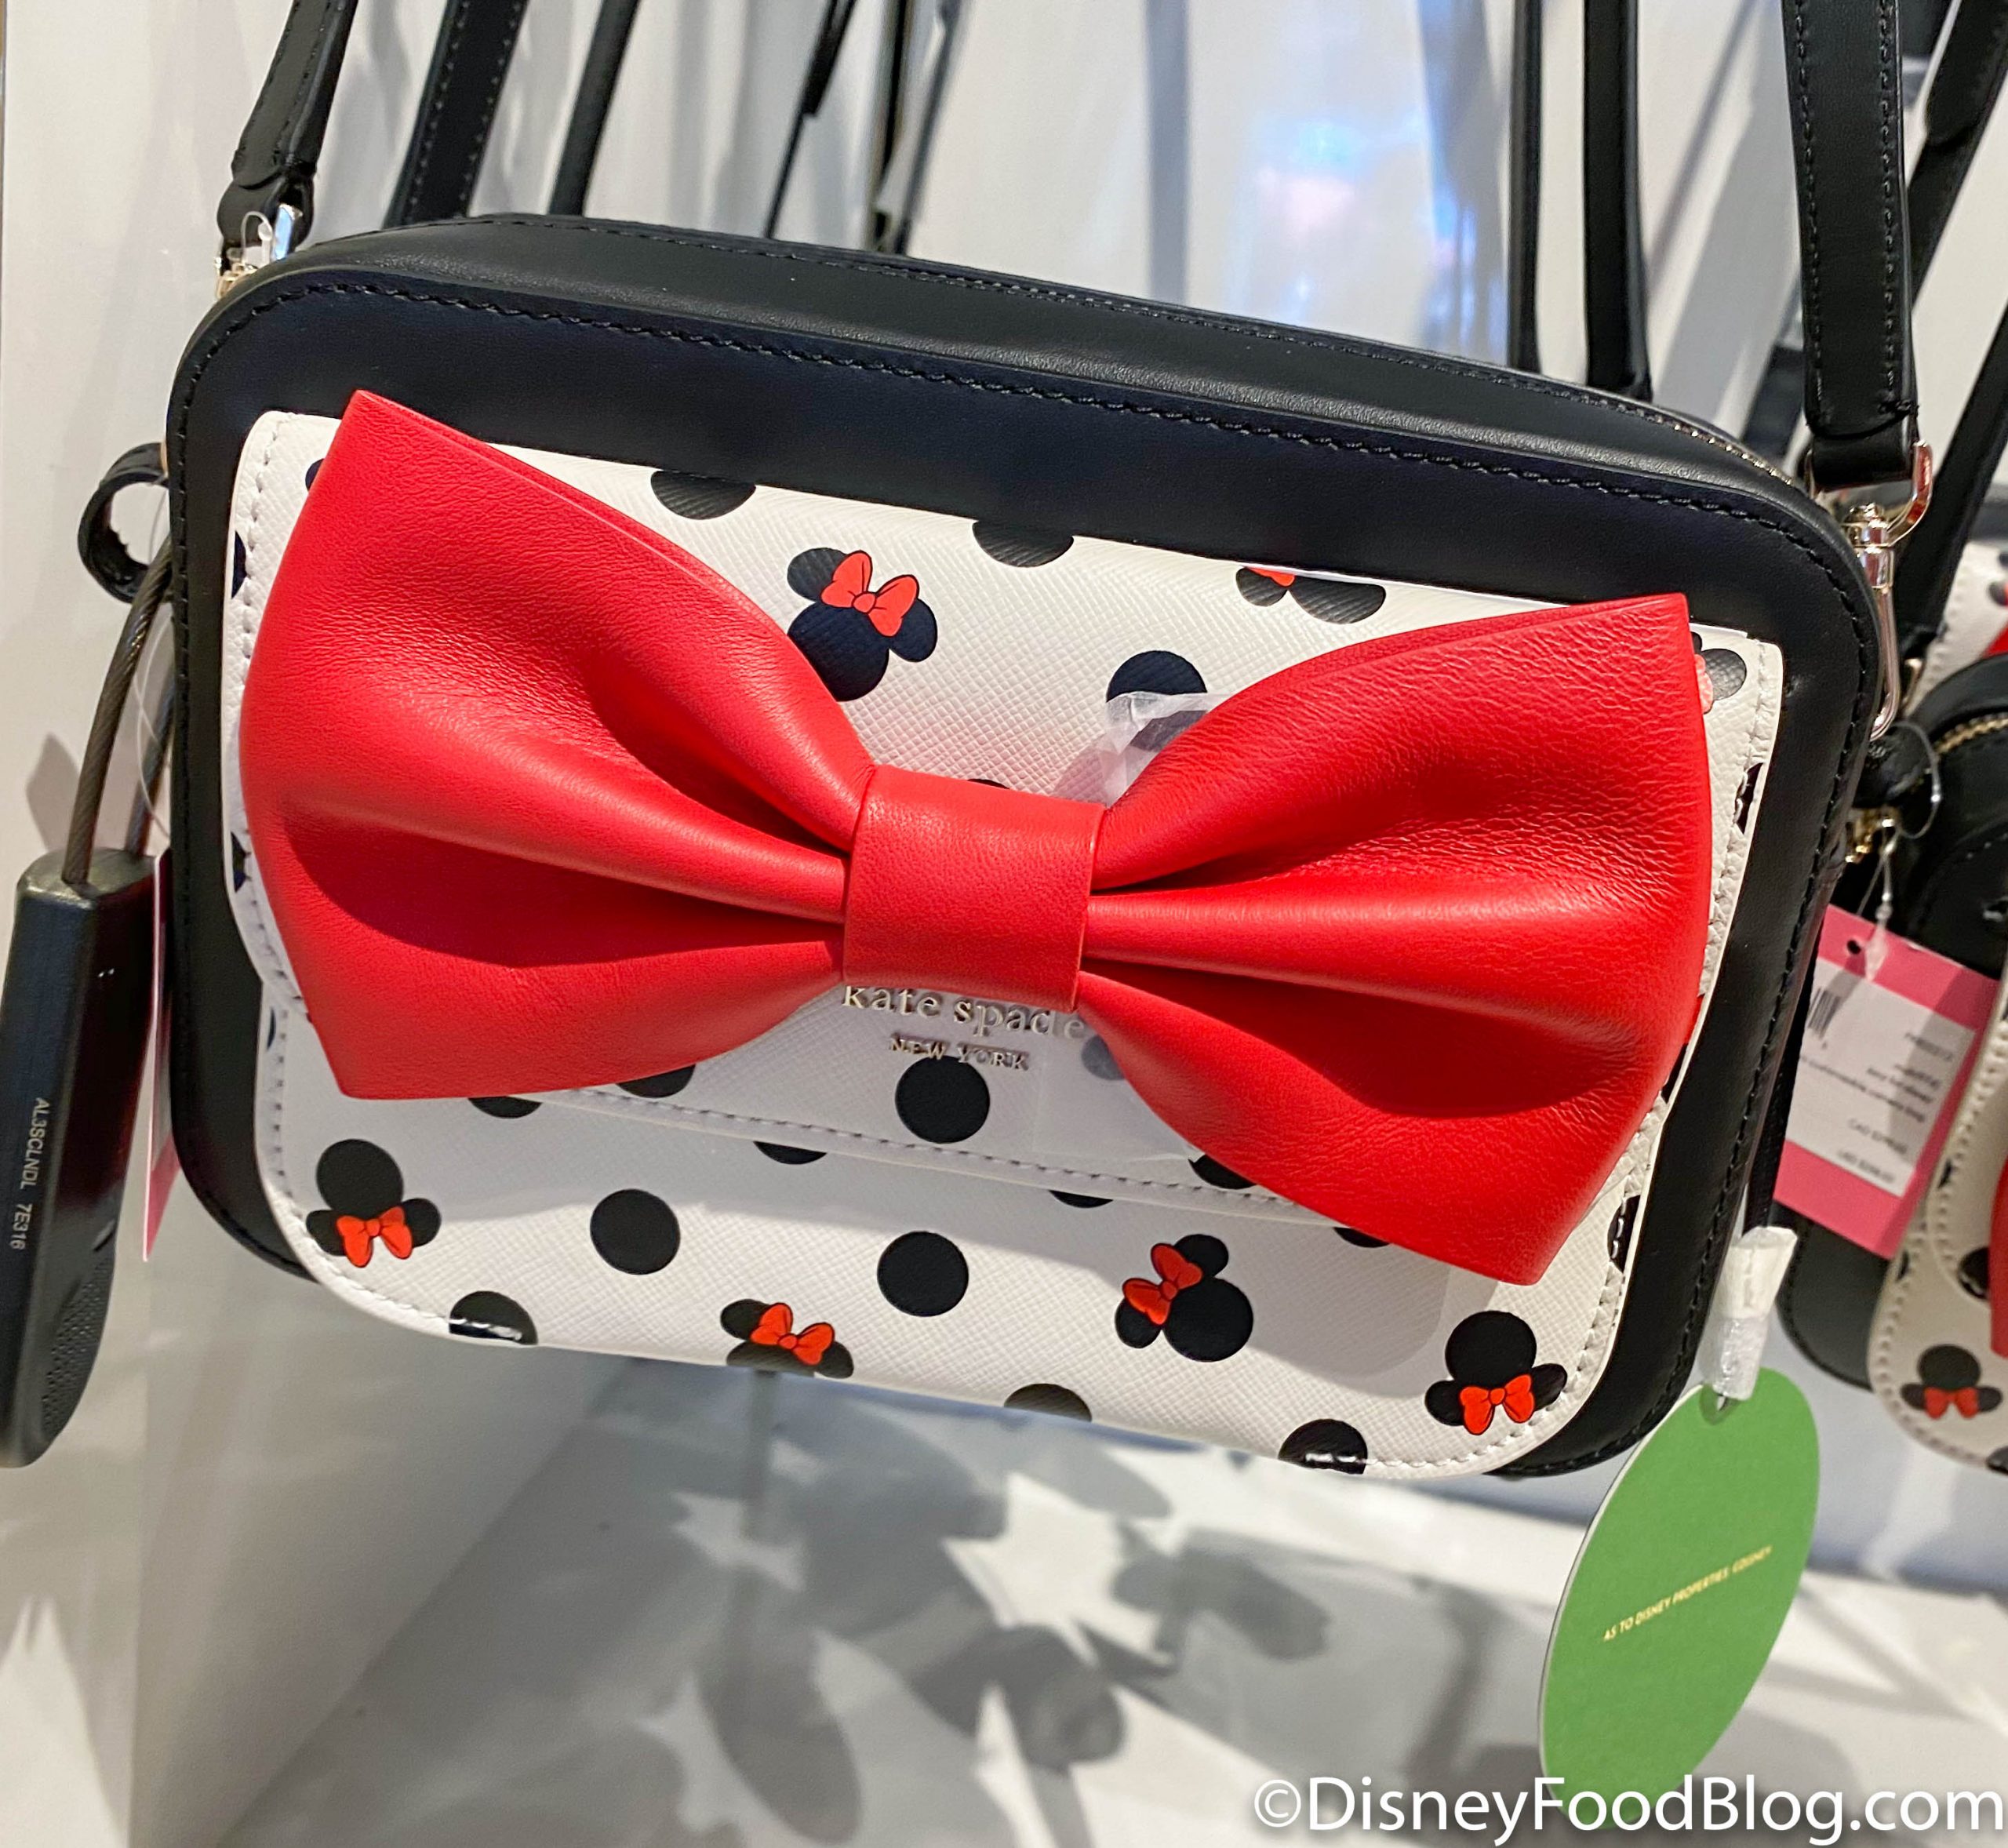 The NEW Kate Spade Minnie Mouse Icon Collection is Now Available in